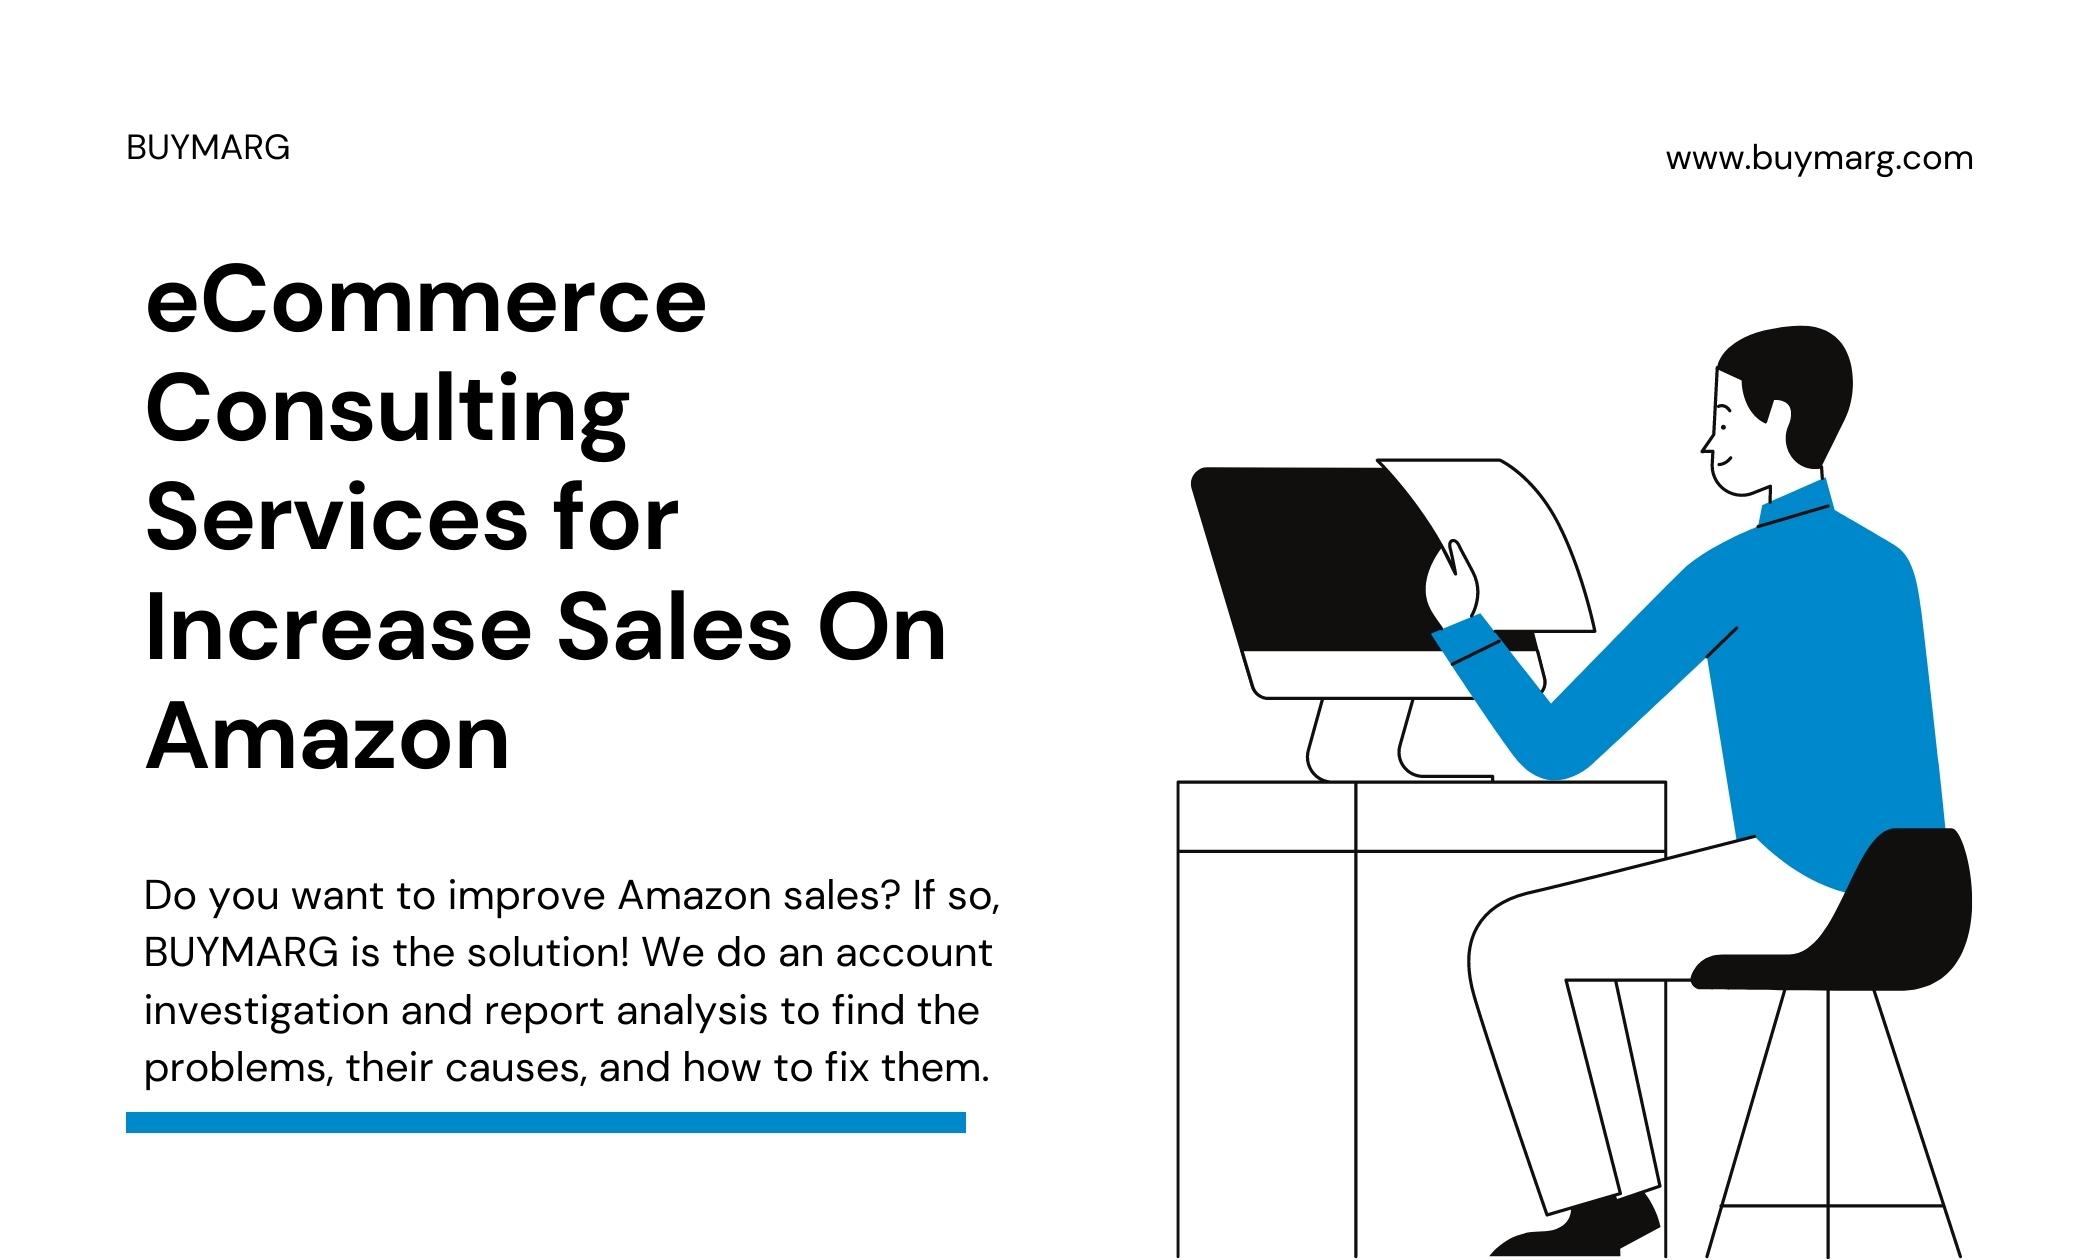 eCommerce Consulting Services for Increase Sales On Amazon